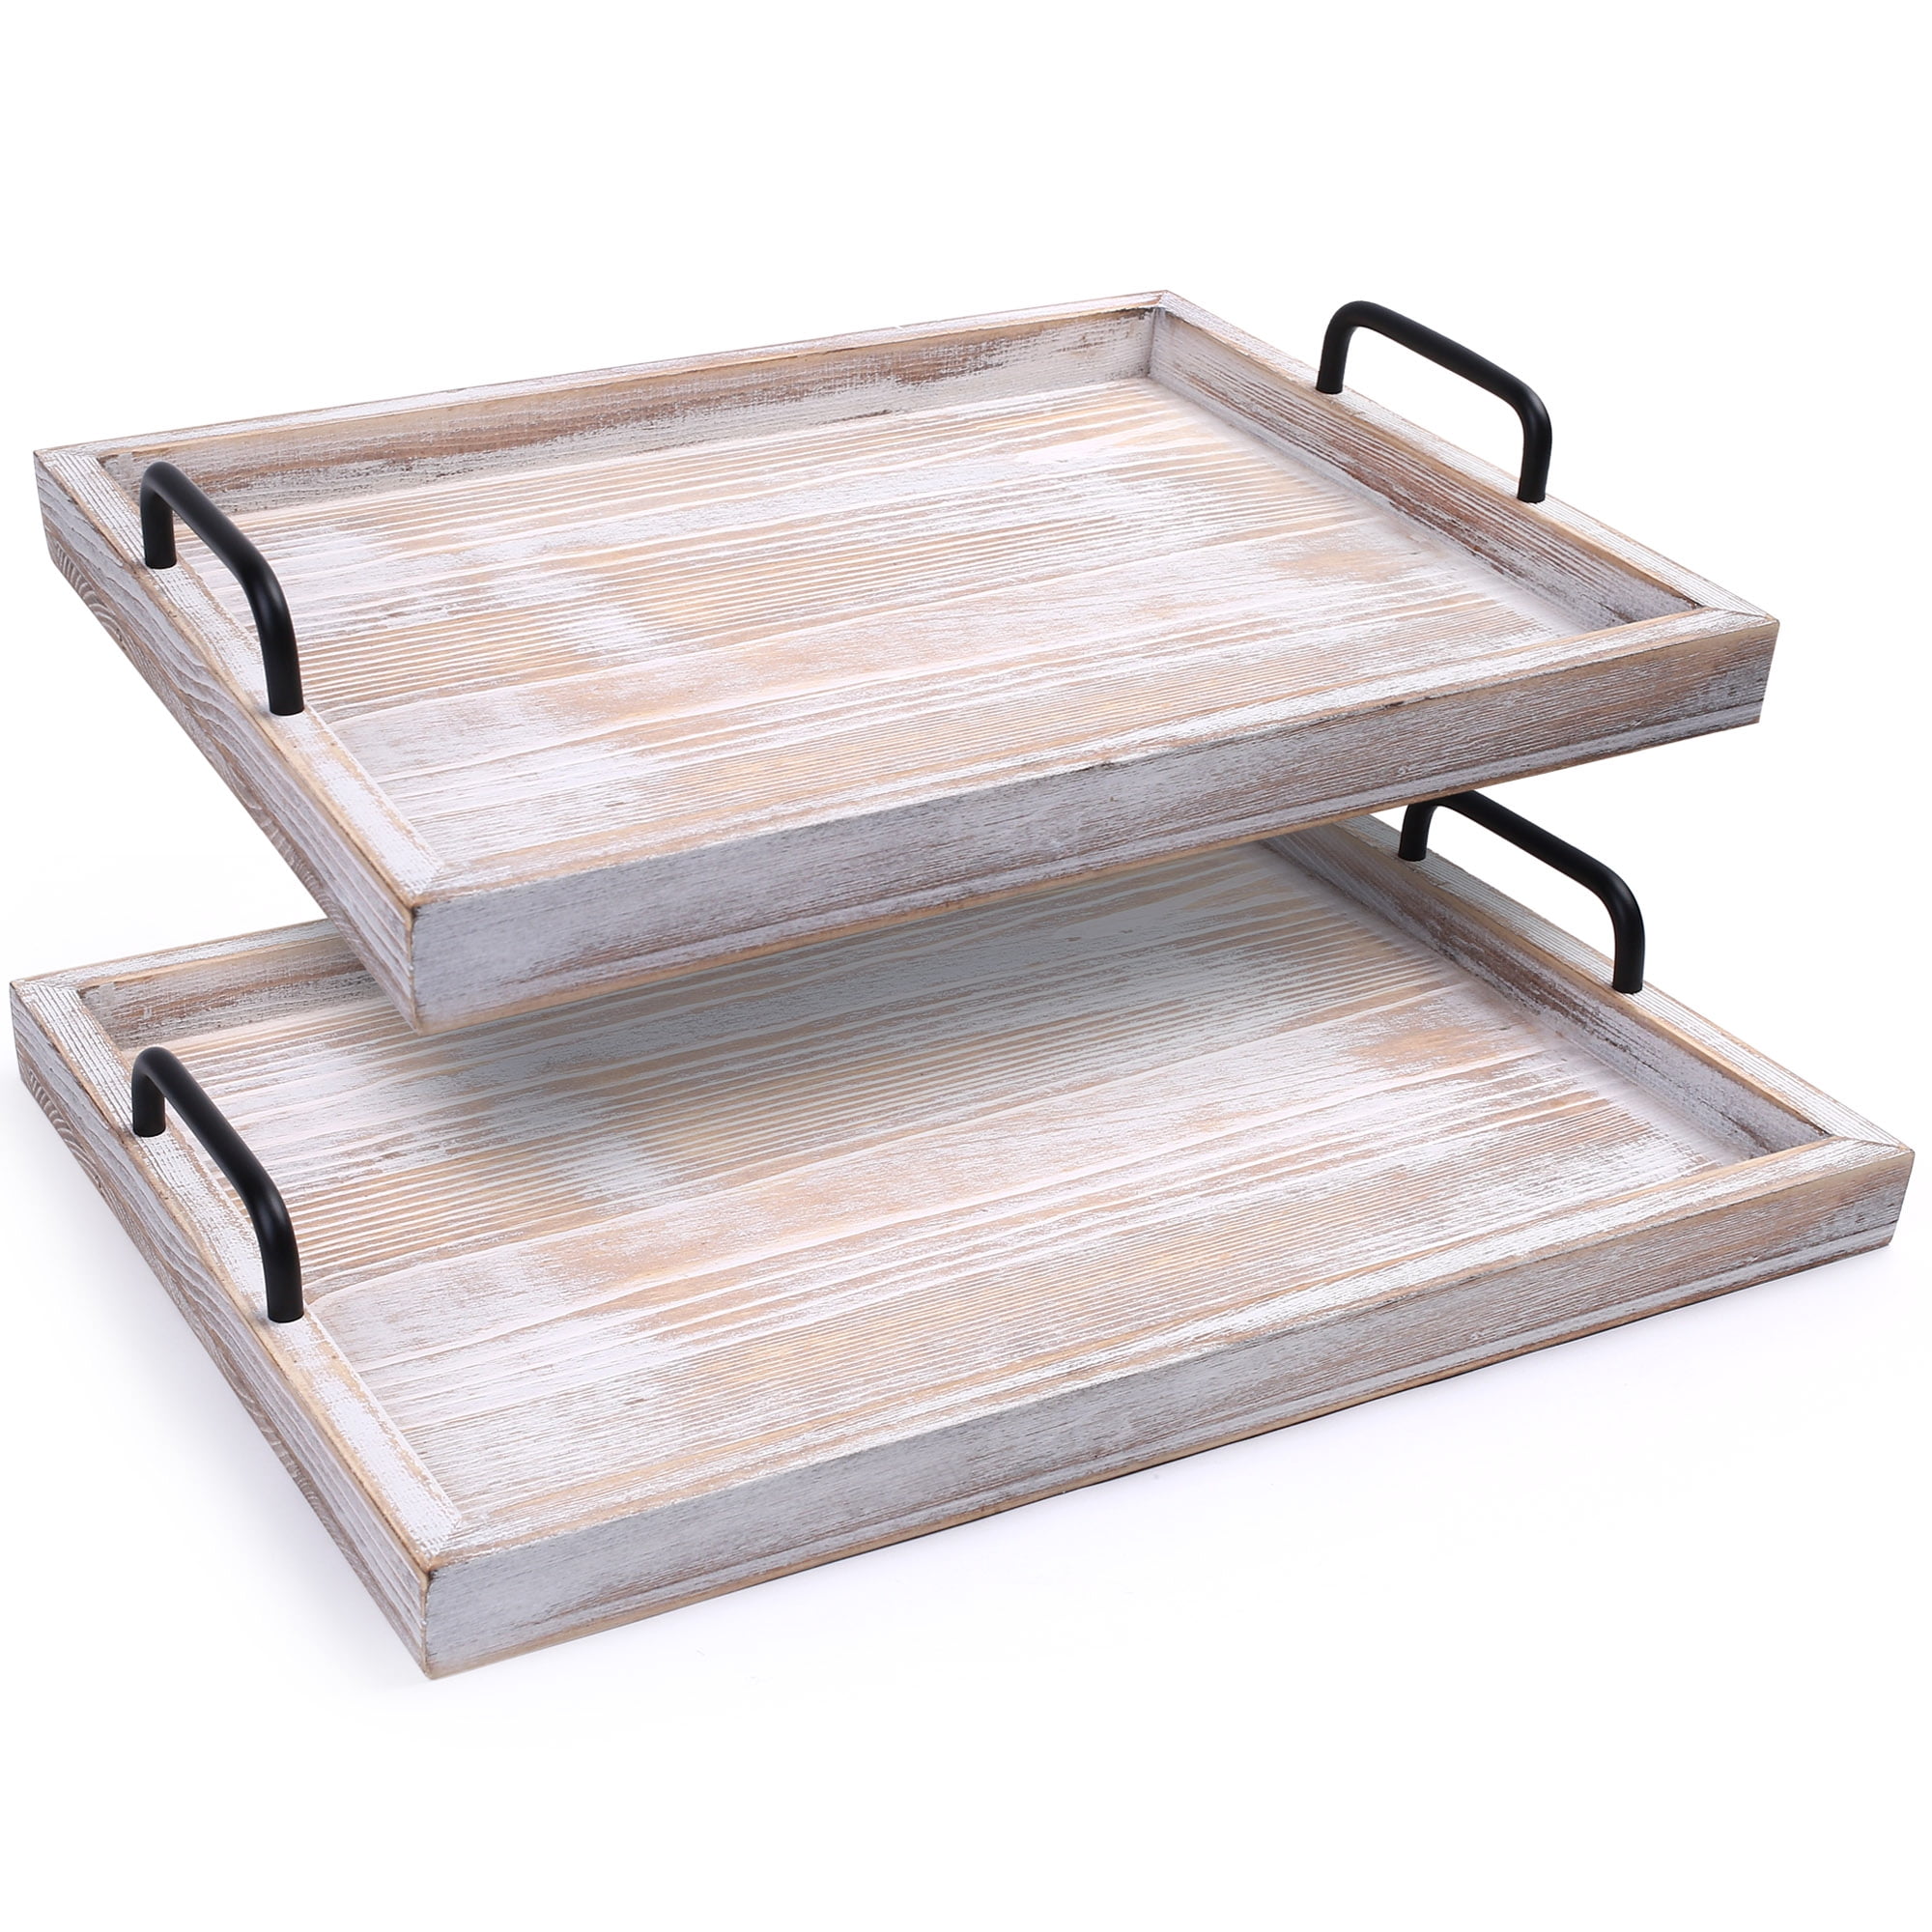 Better Homes & Gardens Rectangle Two-Tier Wood Serving Tray, 14.29